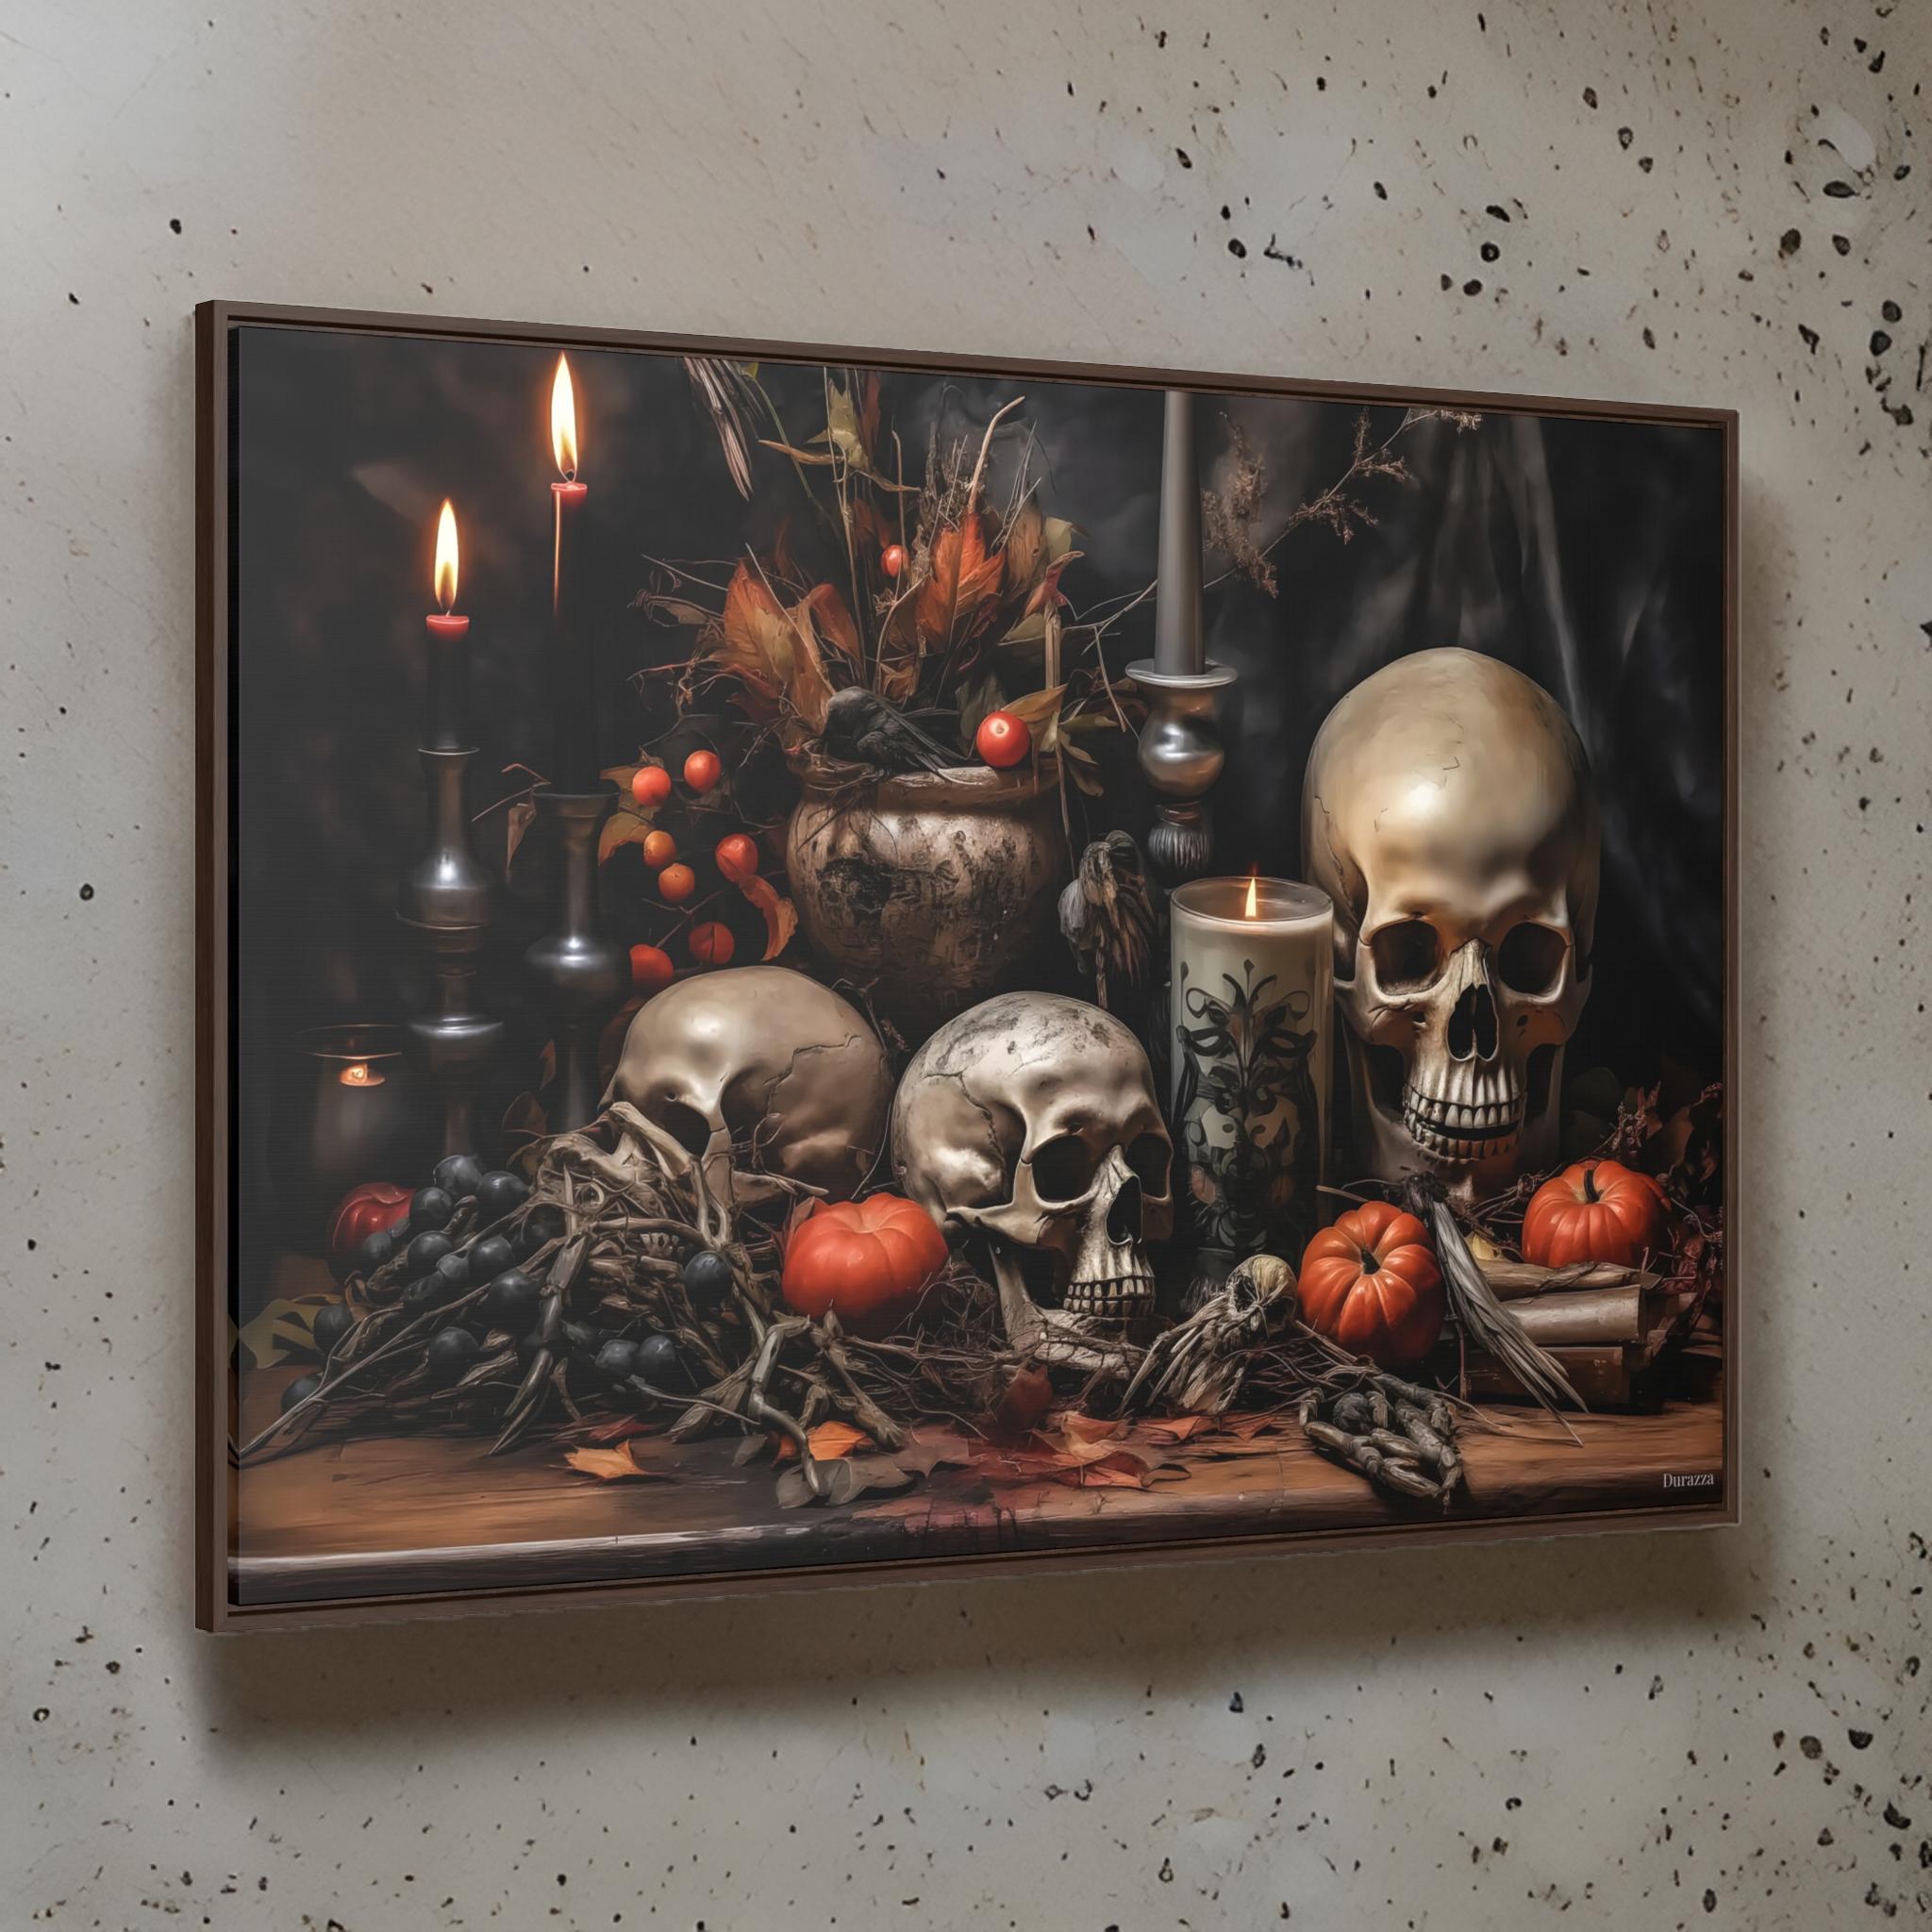 Candlelight and Skulls Wall Art: Gothic Home Decor